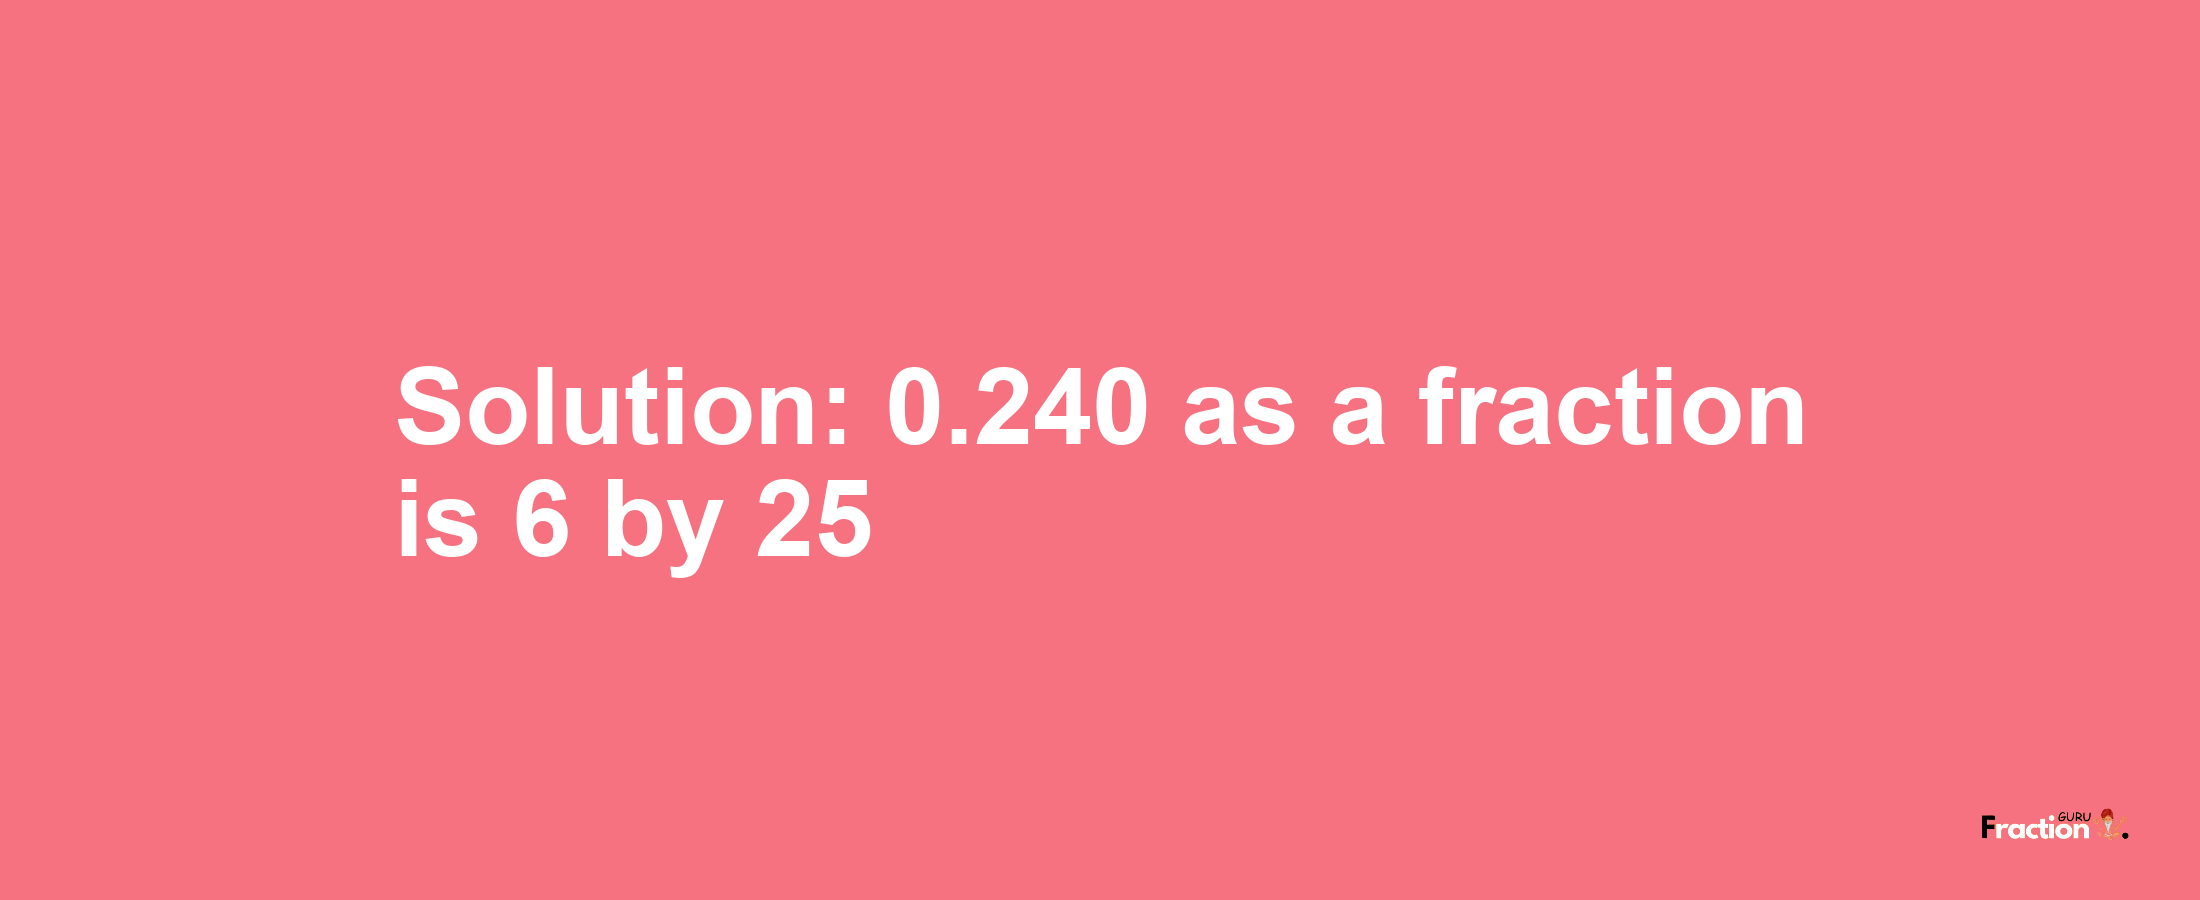 Solution:0.240 as a fraction is 6/25